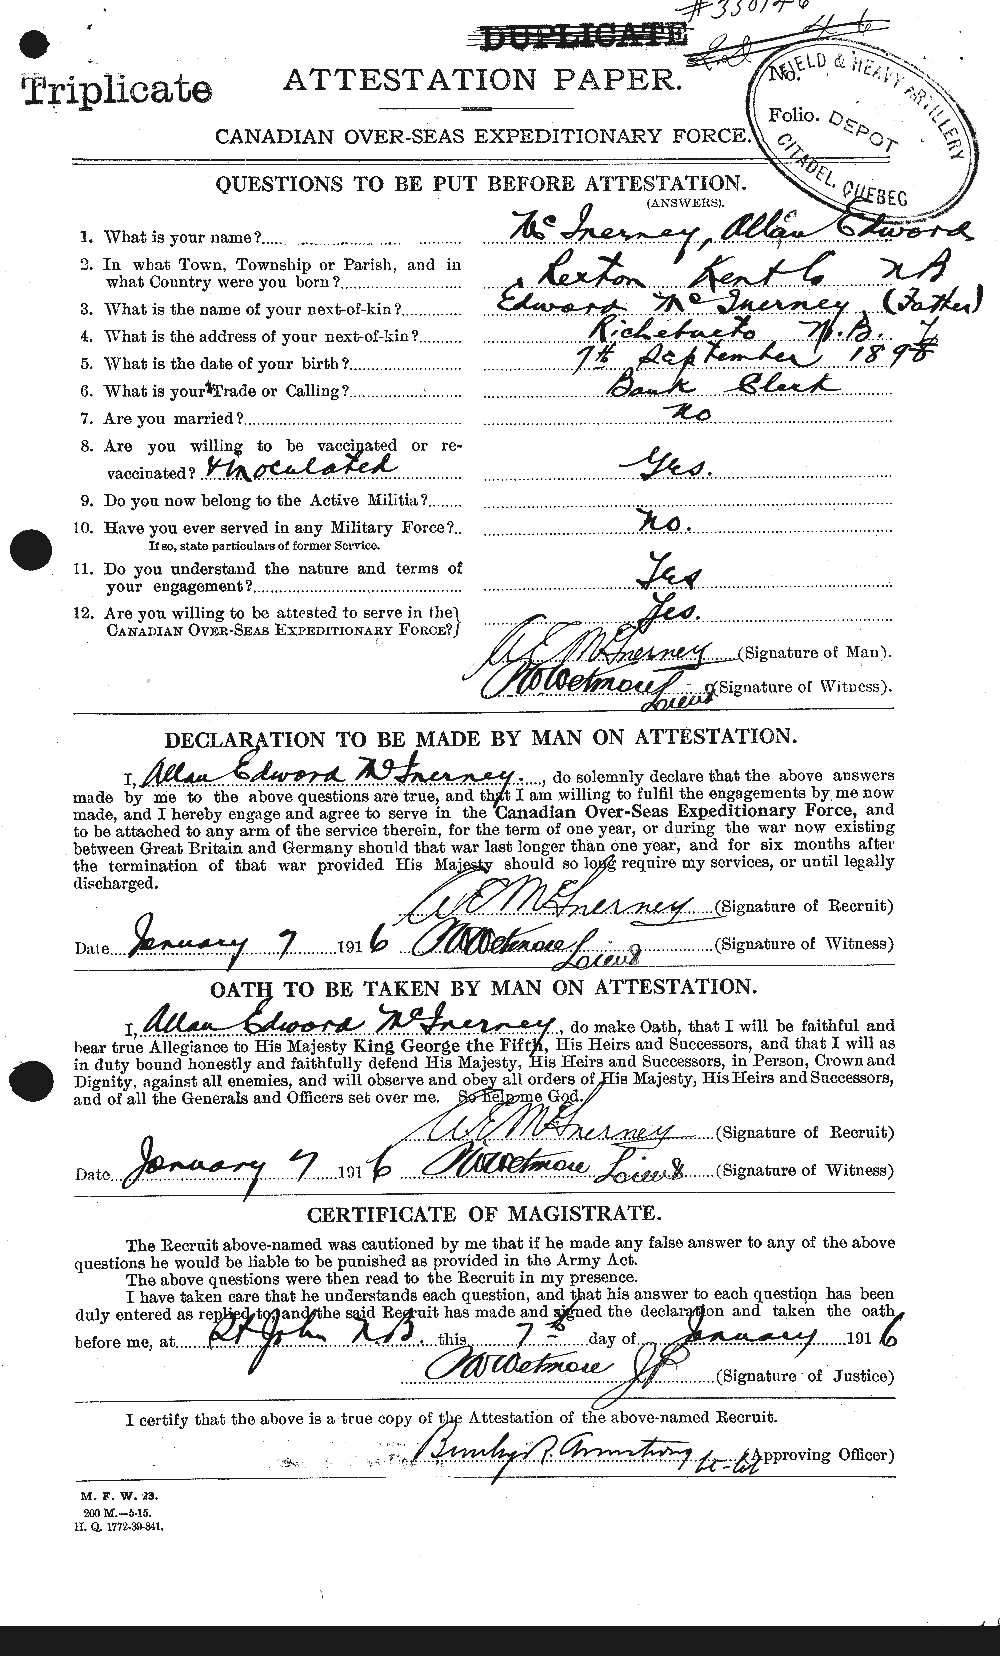 Personnel Records of the First World War - CEF 526569a